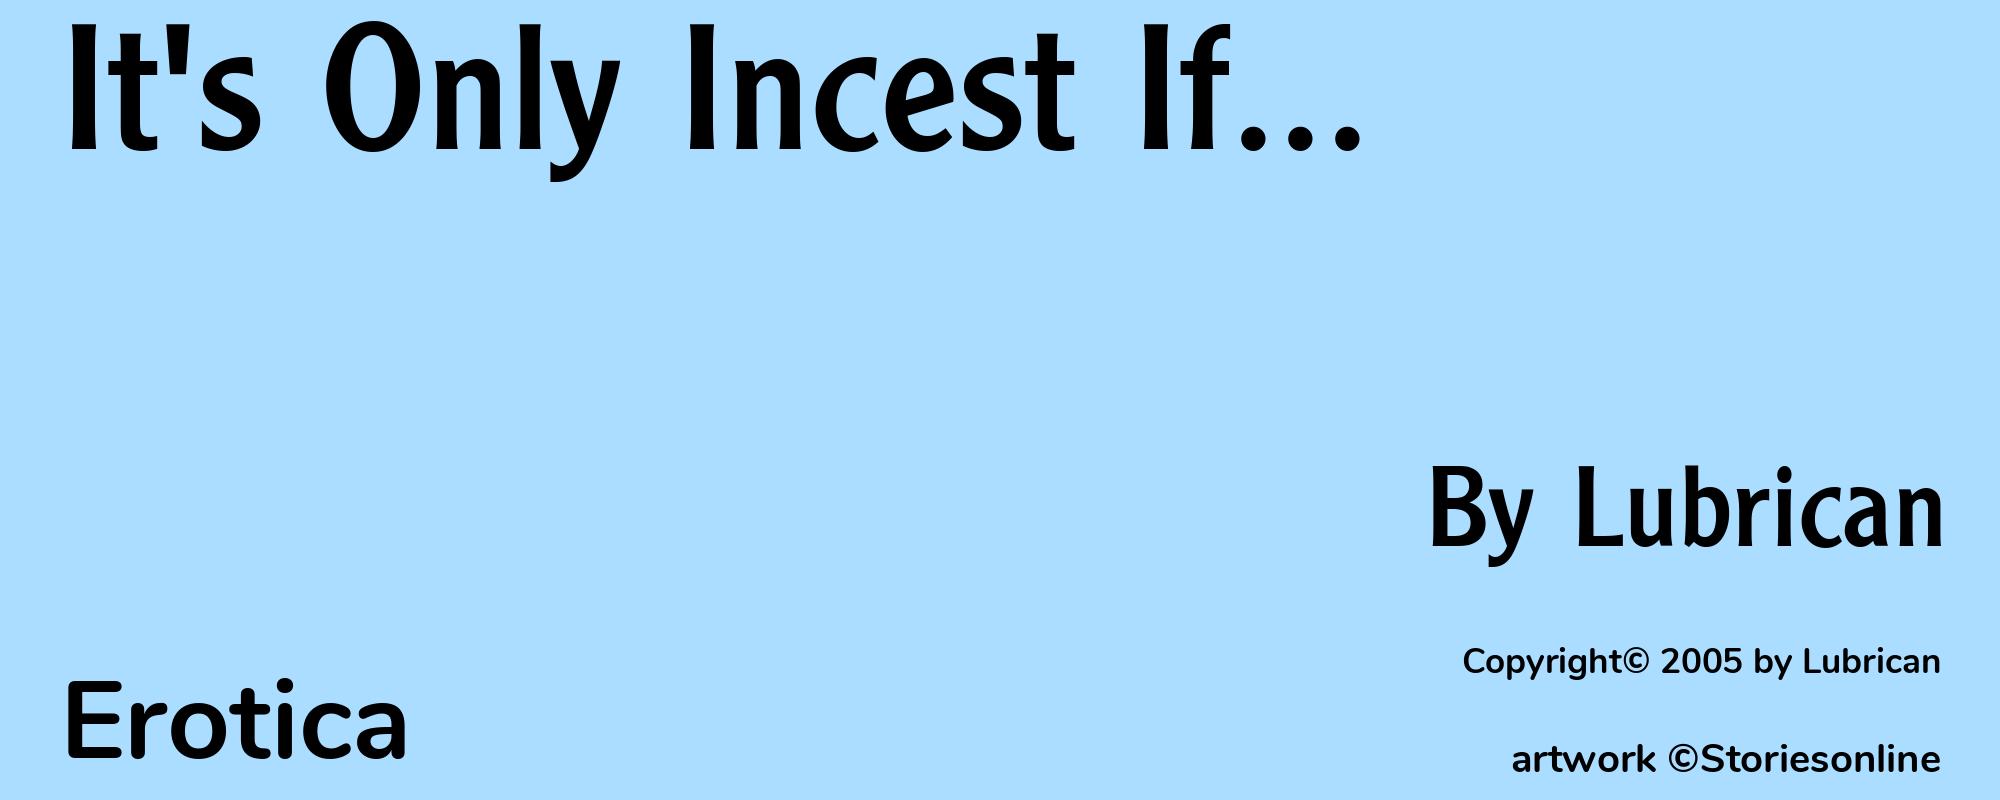 It's Only Incest If... - Cover